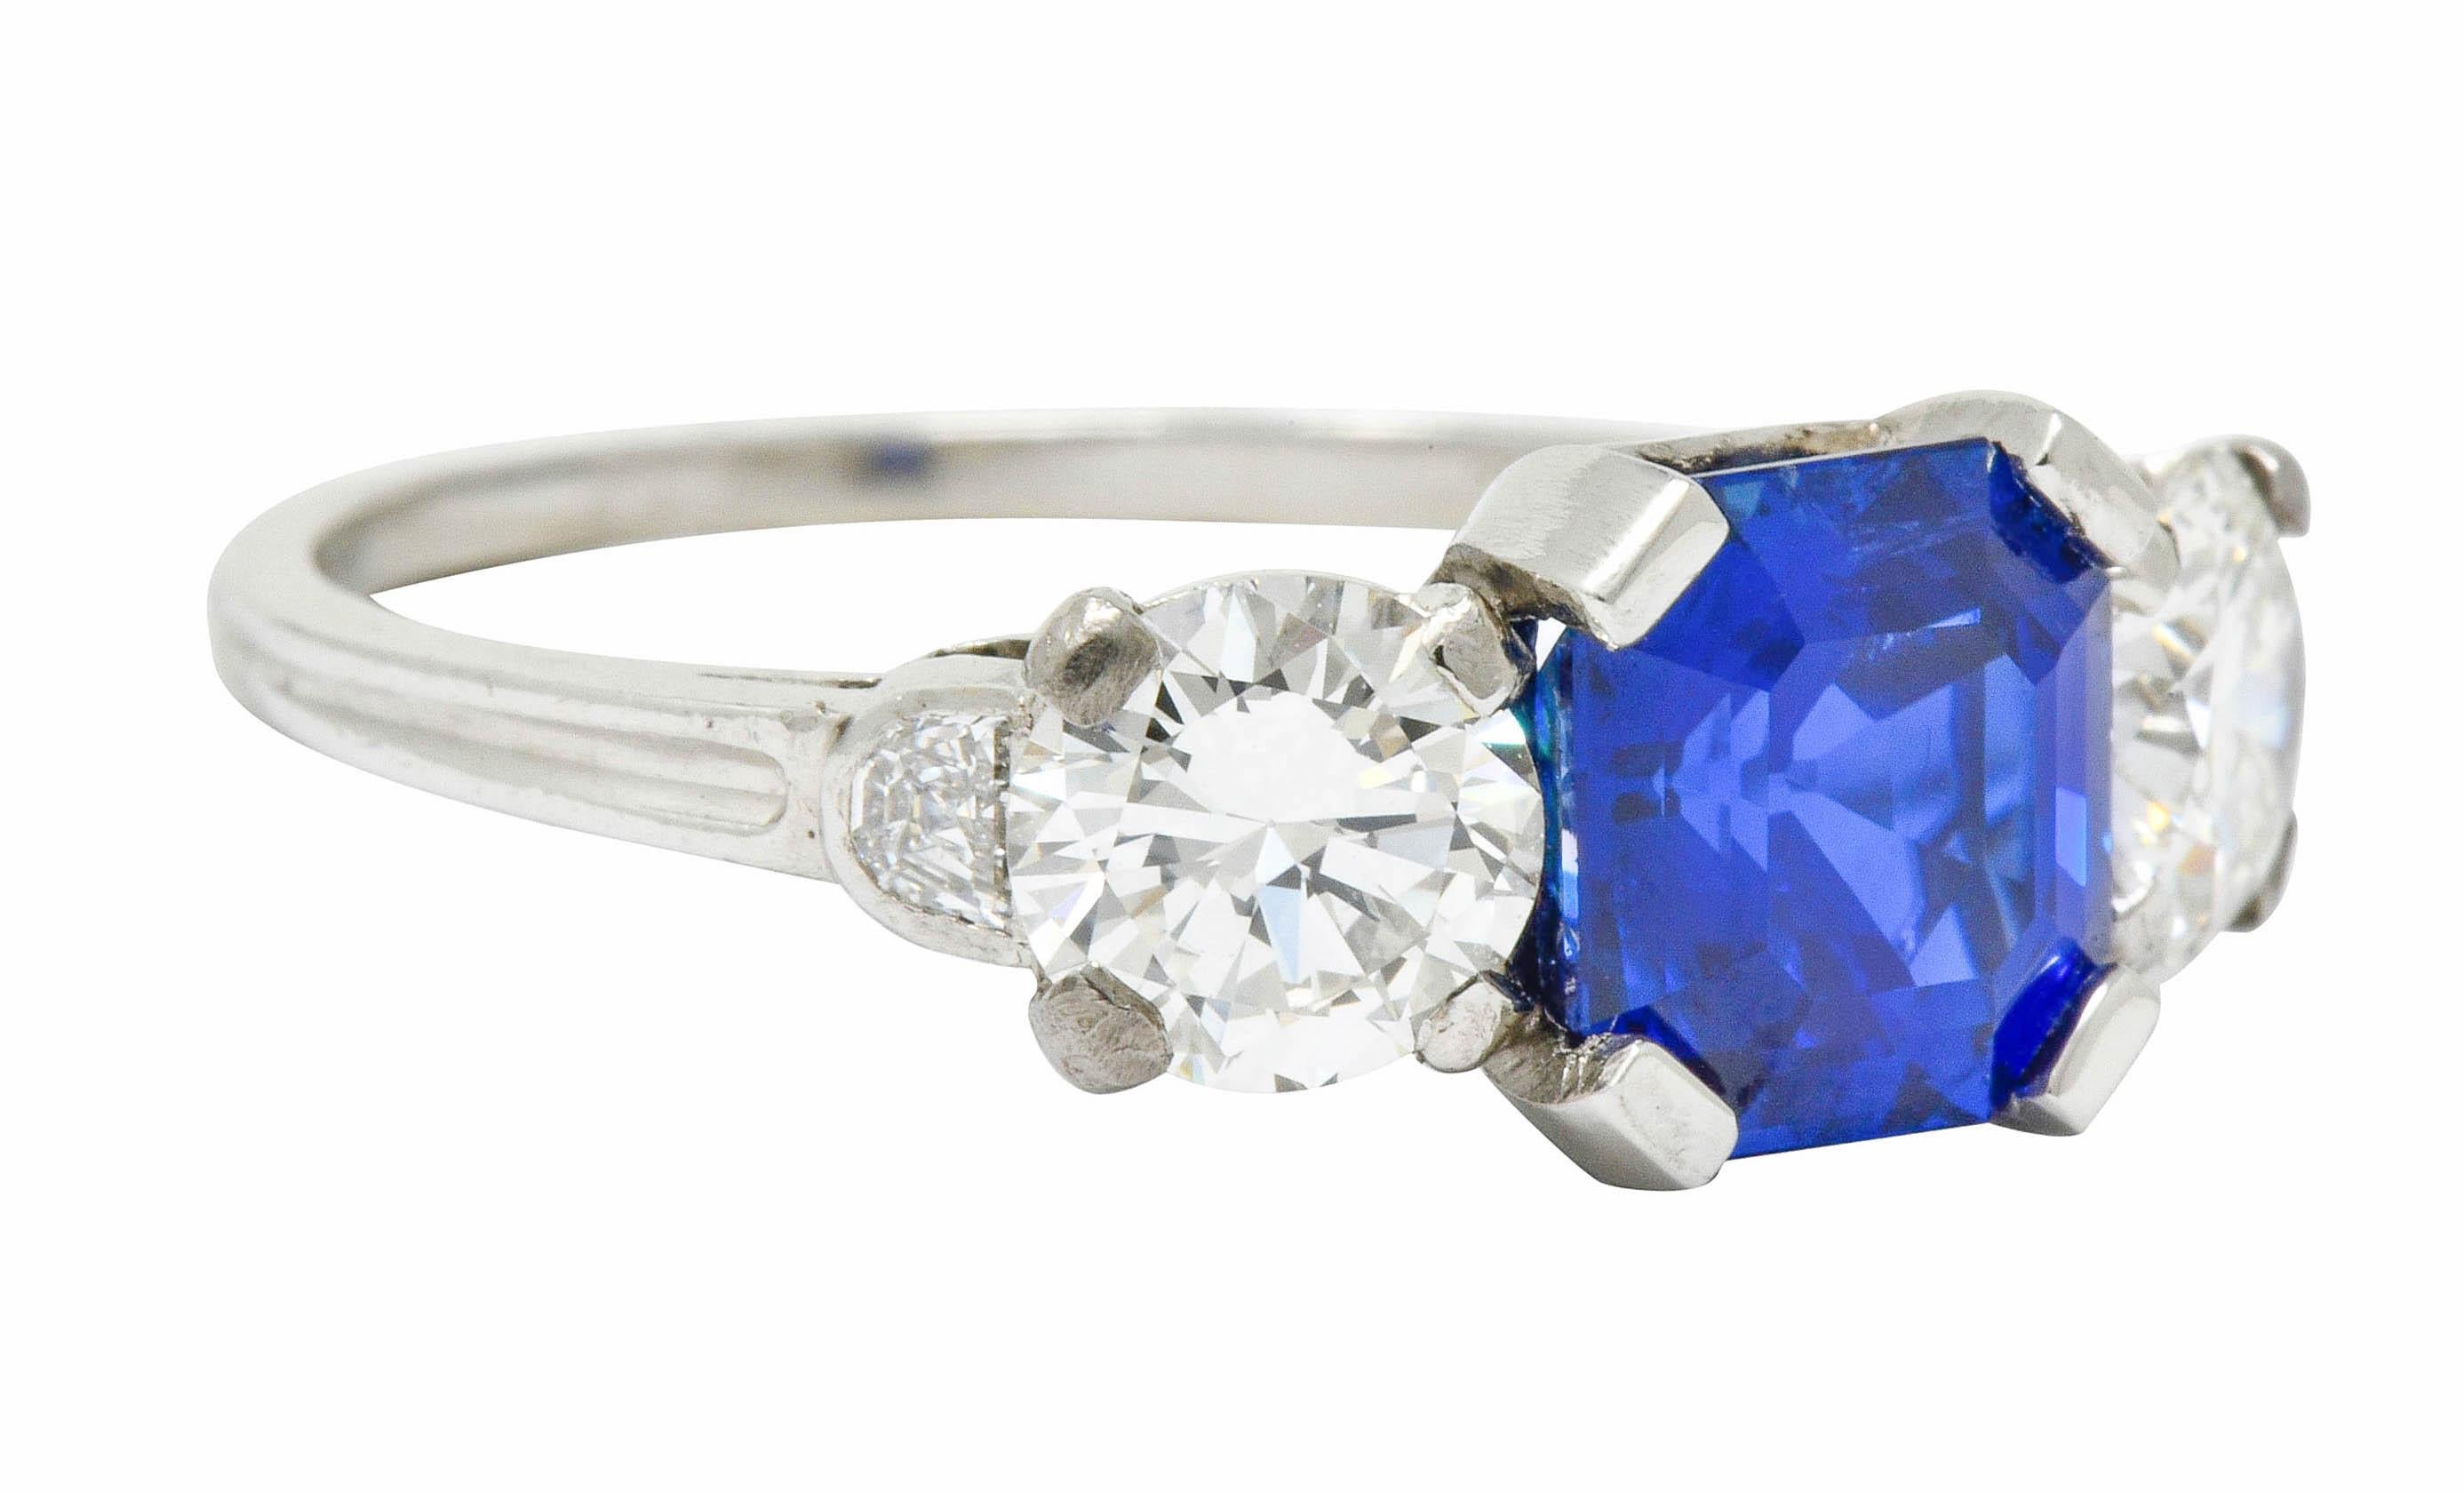 Centering a square step cut Ceylon sapphire weighing 2.25 carats; bright royal blue in color with no evidence of heat

Flanked by two transitional cut diamonds weighing 1.12 carats total, F/G color with VS clarity

Each shoulder accented by half